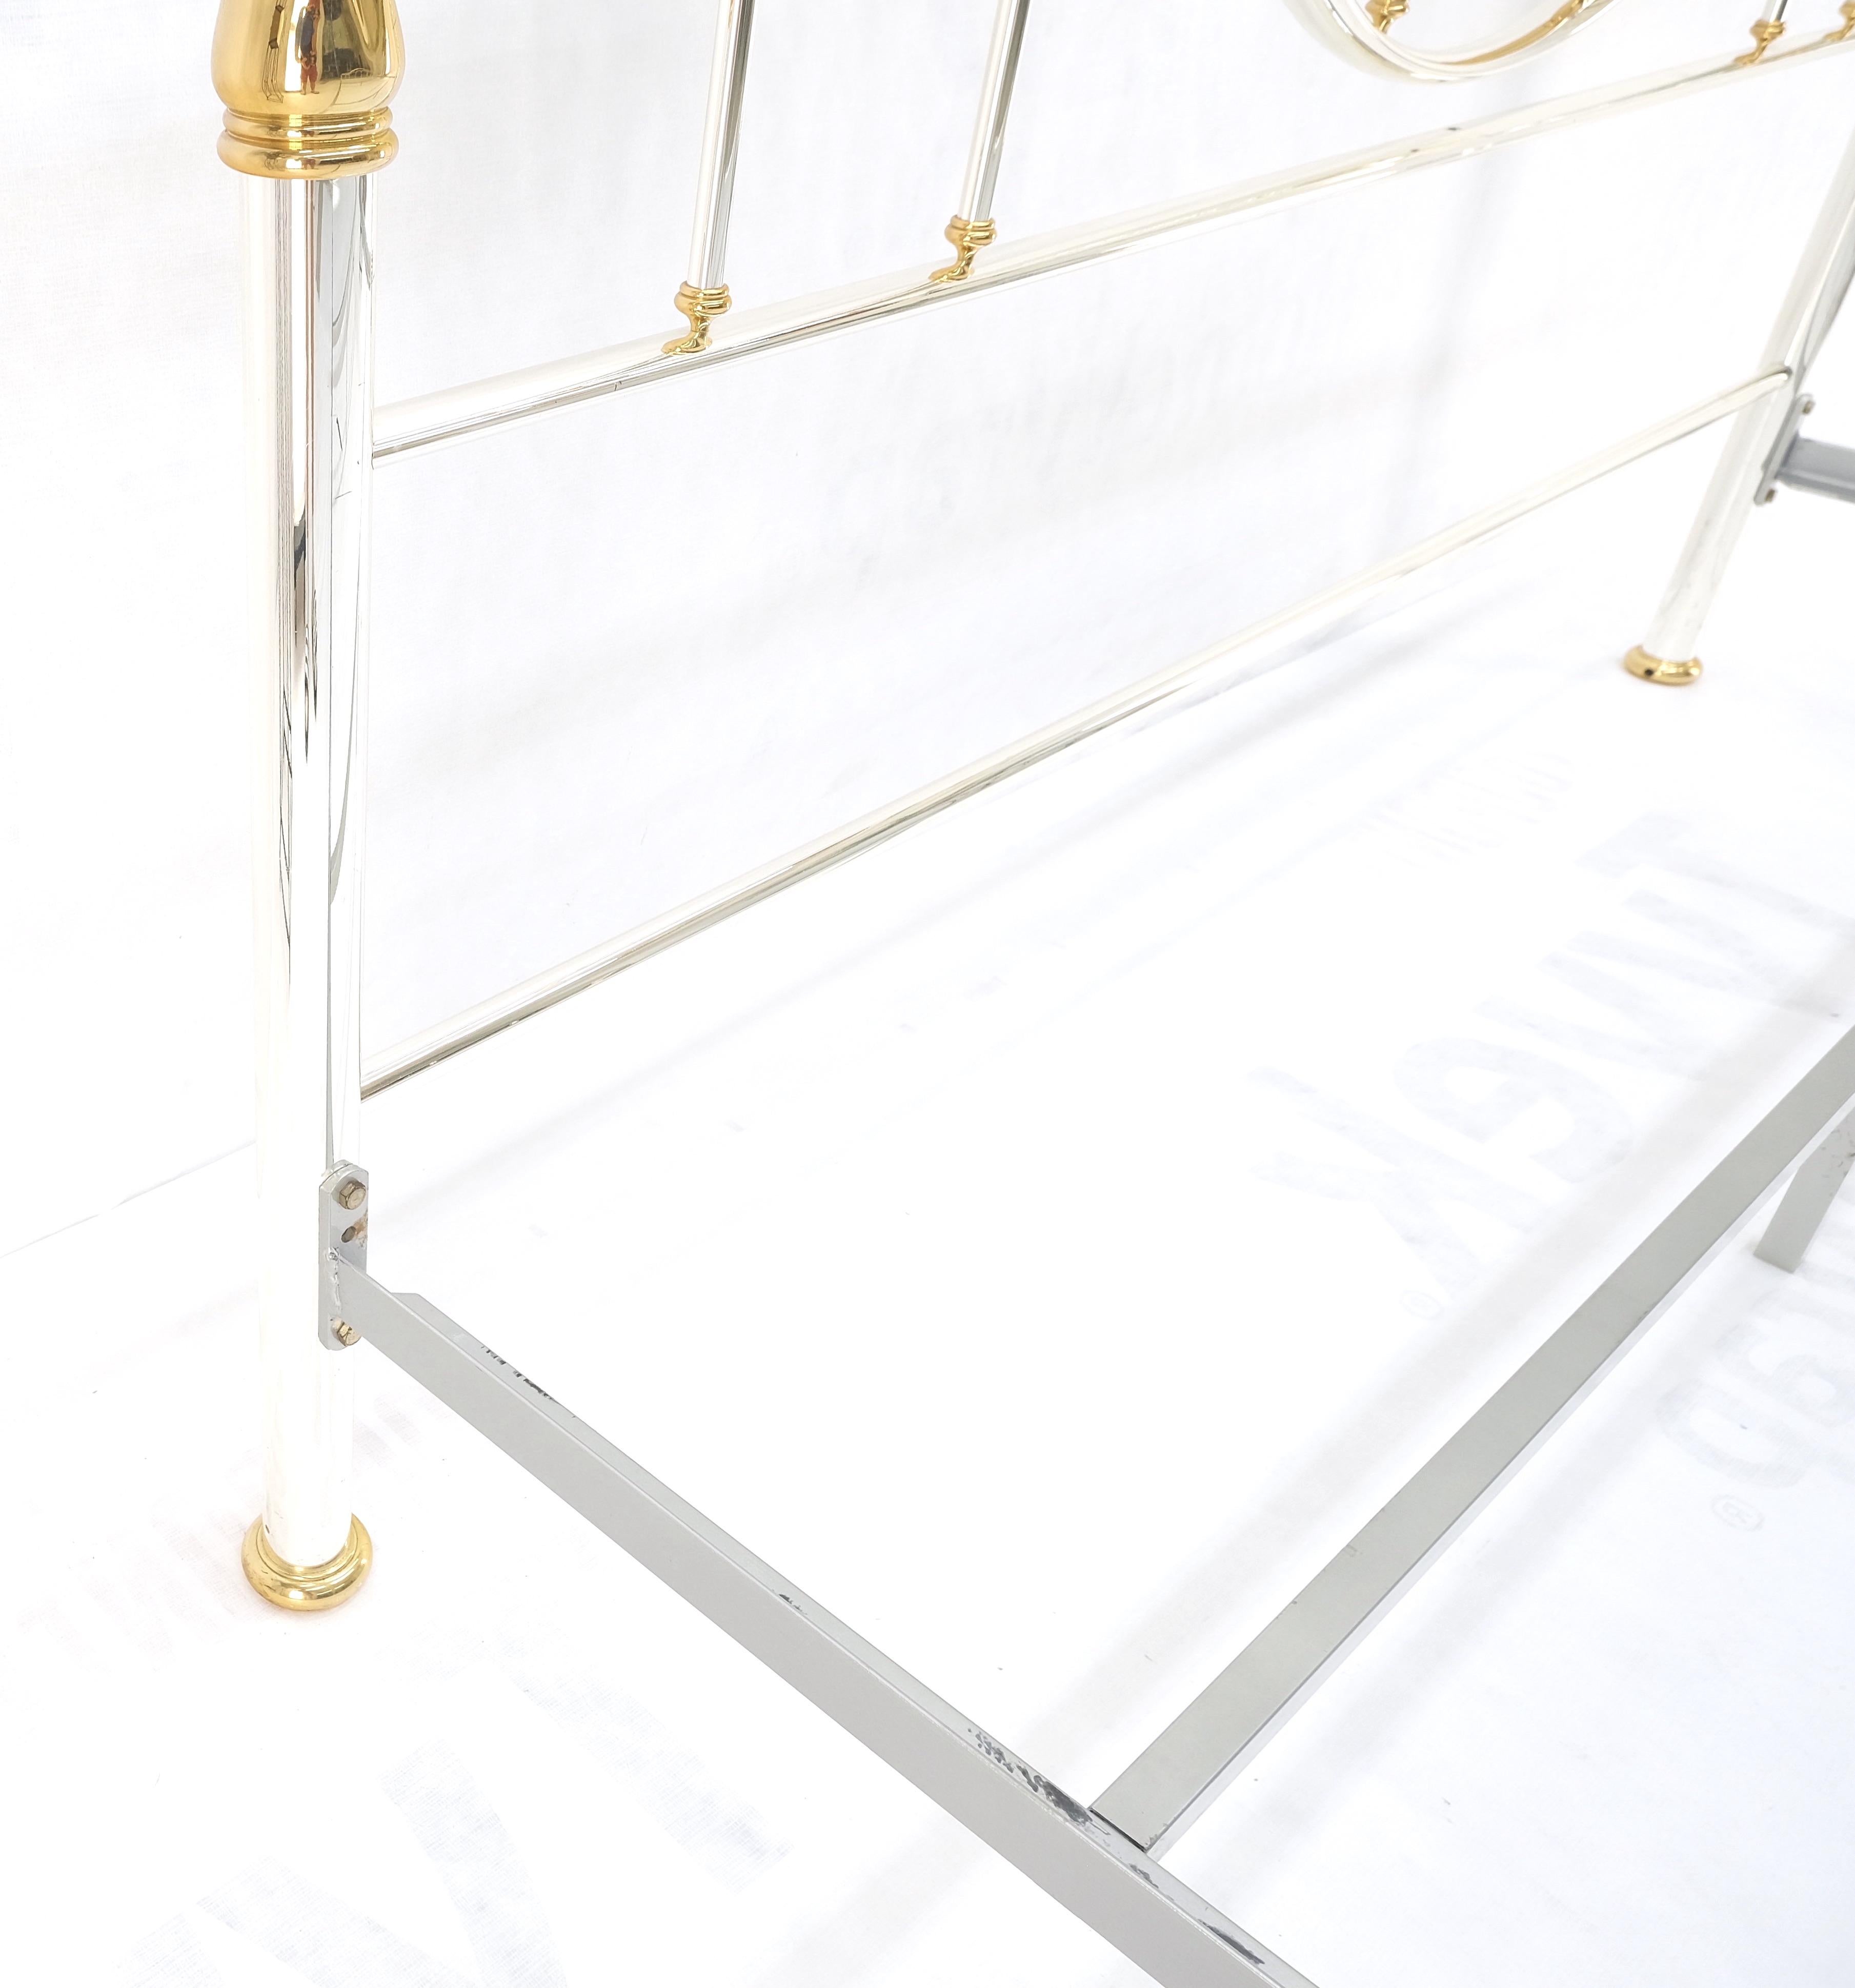 Brass & Silver Plated King Size Hollywood Regency Bed Frame Rails Mid Century Quality.